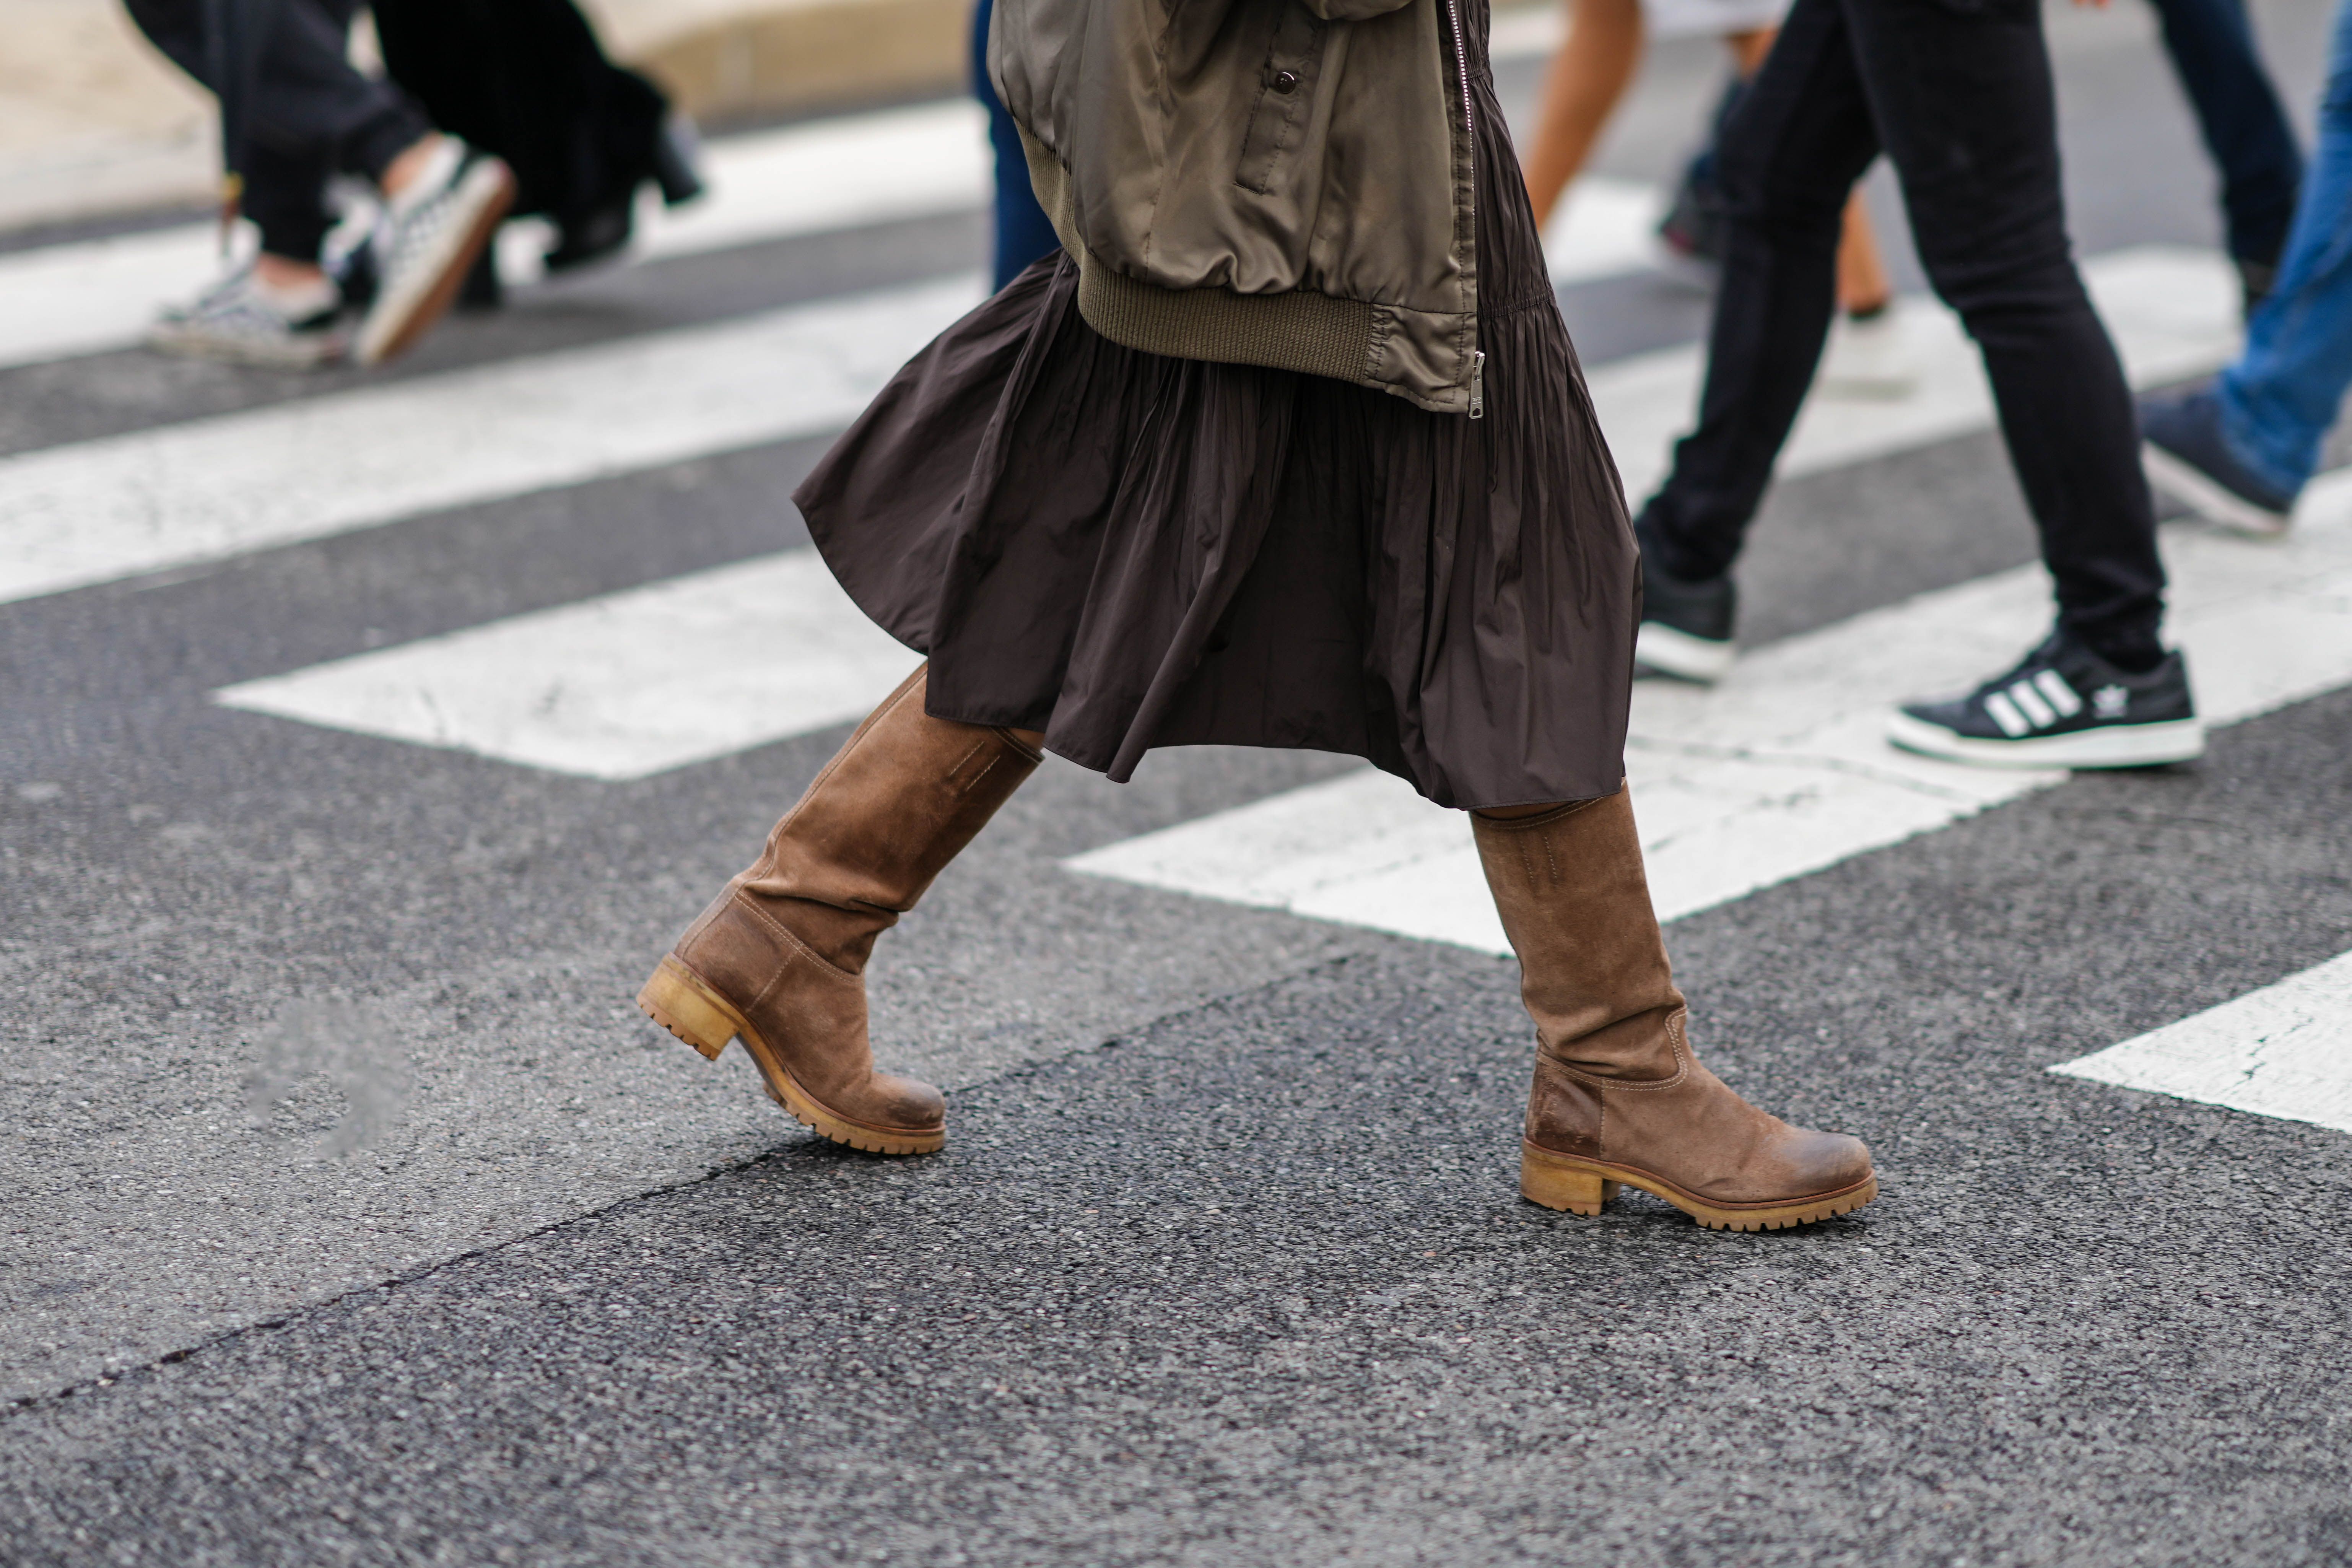 15 Fall Boot Outfits That Are Easy and Chic